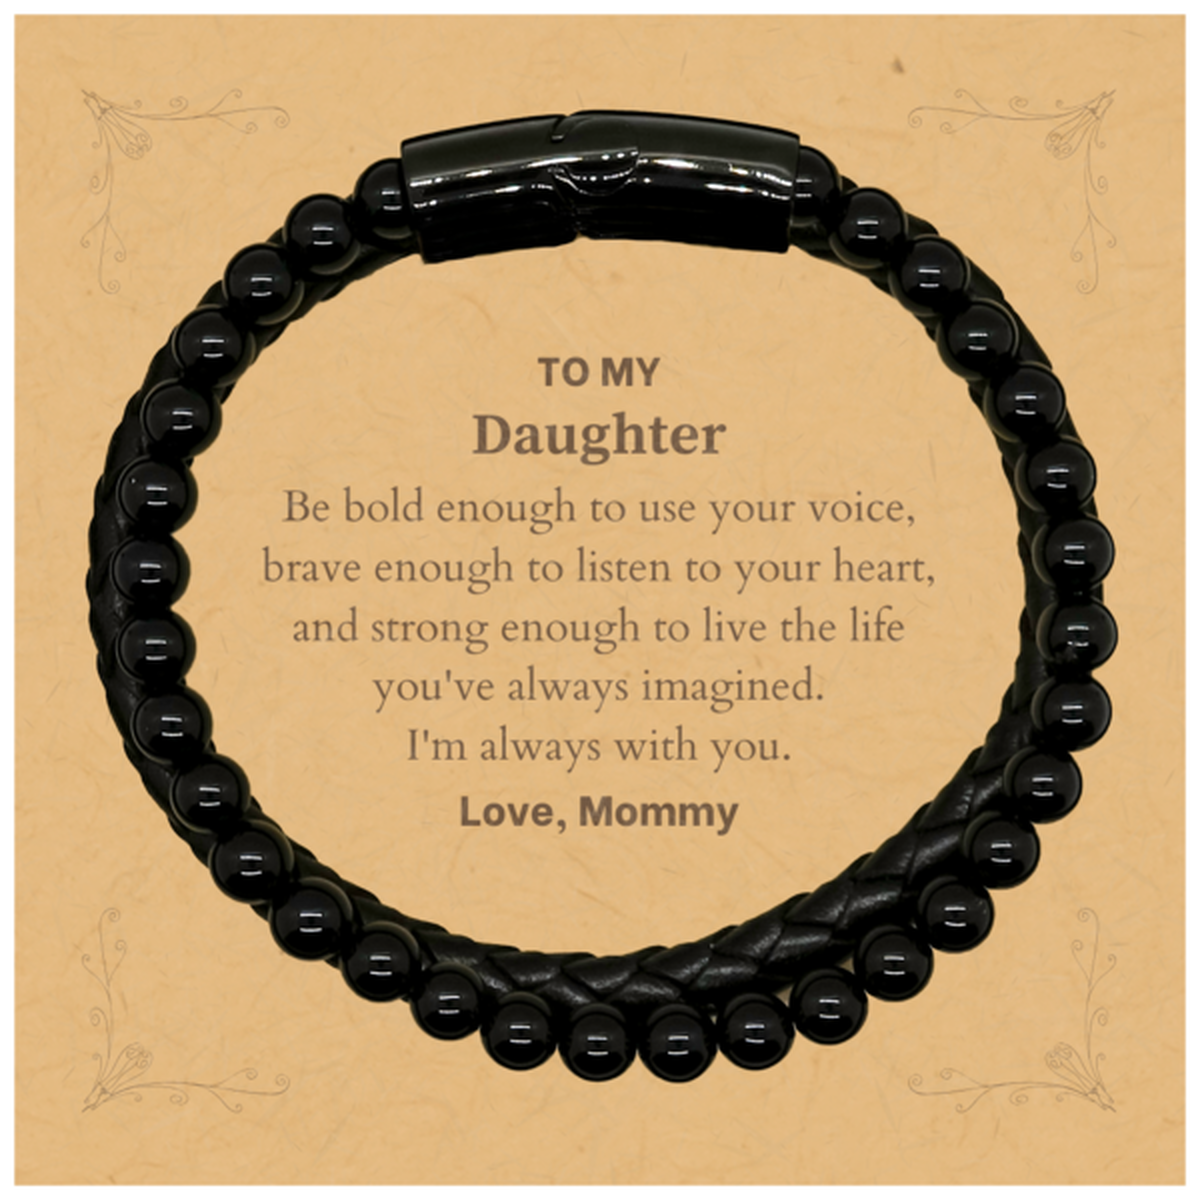 Keepsake Daughter Stone Leather Bracelets Gift Idea Graduation Christmas Birthday Daughter from Mommy, Daughter Be bold enough to use your voice, brave enough to listen to your heart. Love, Mommy